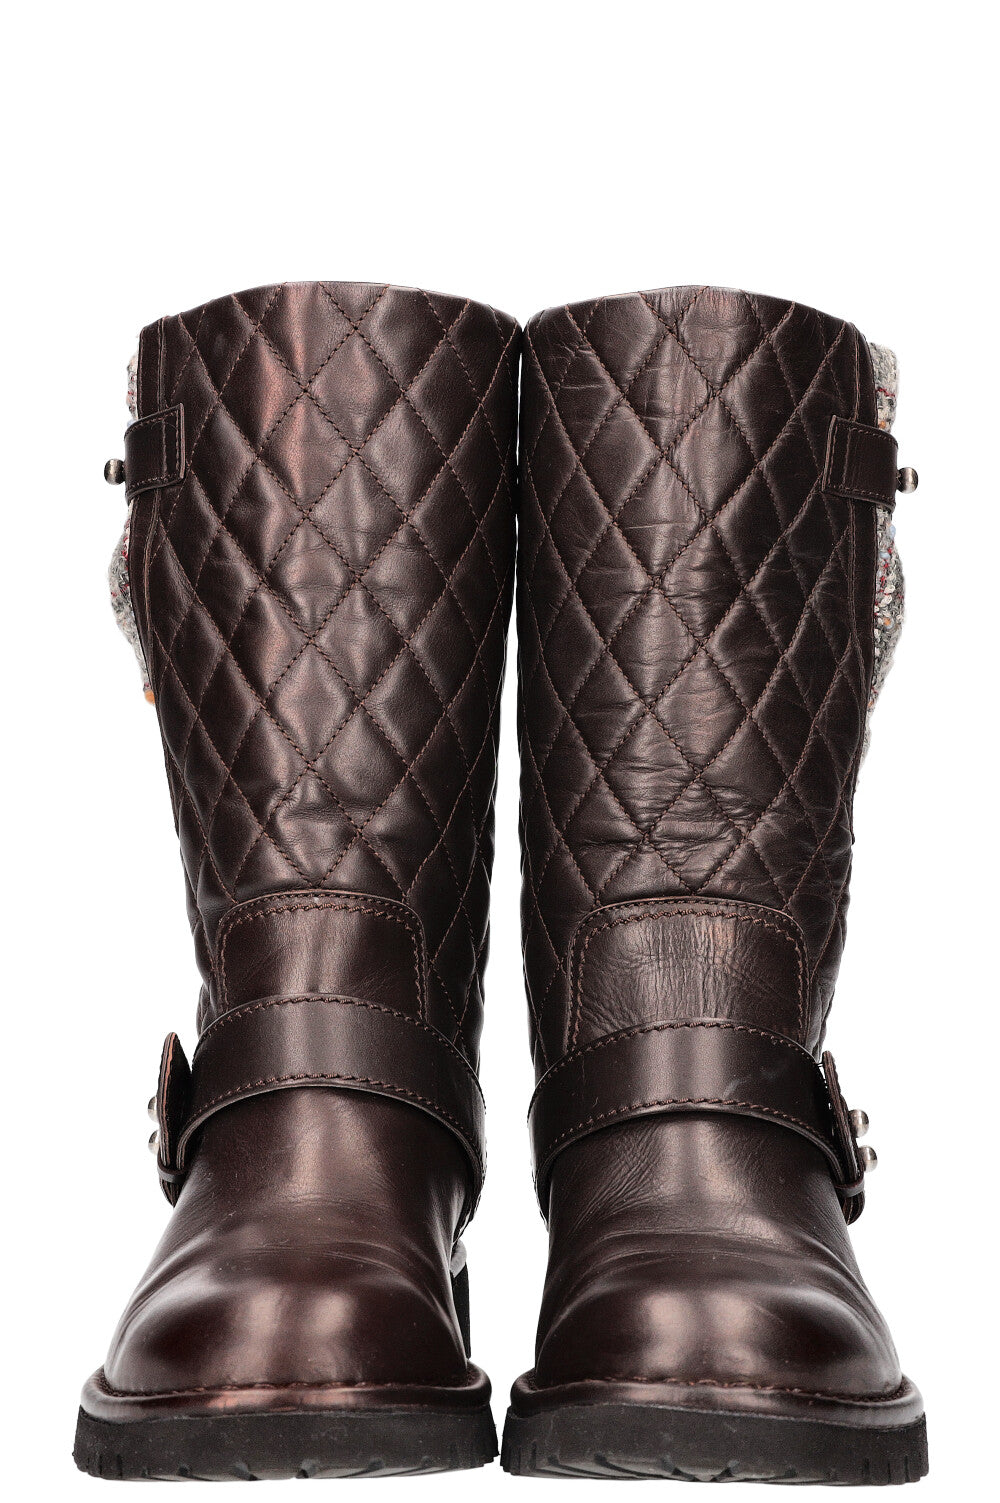 CHANEL Boots Matelasse Brown